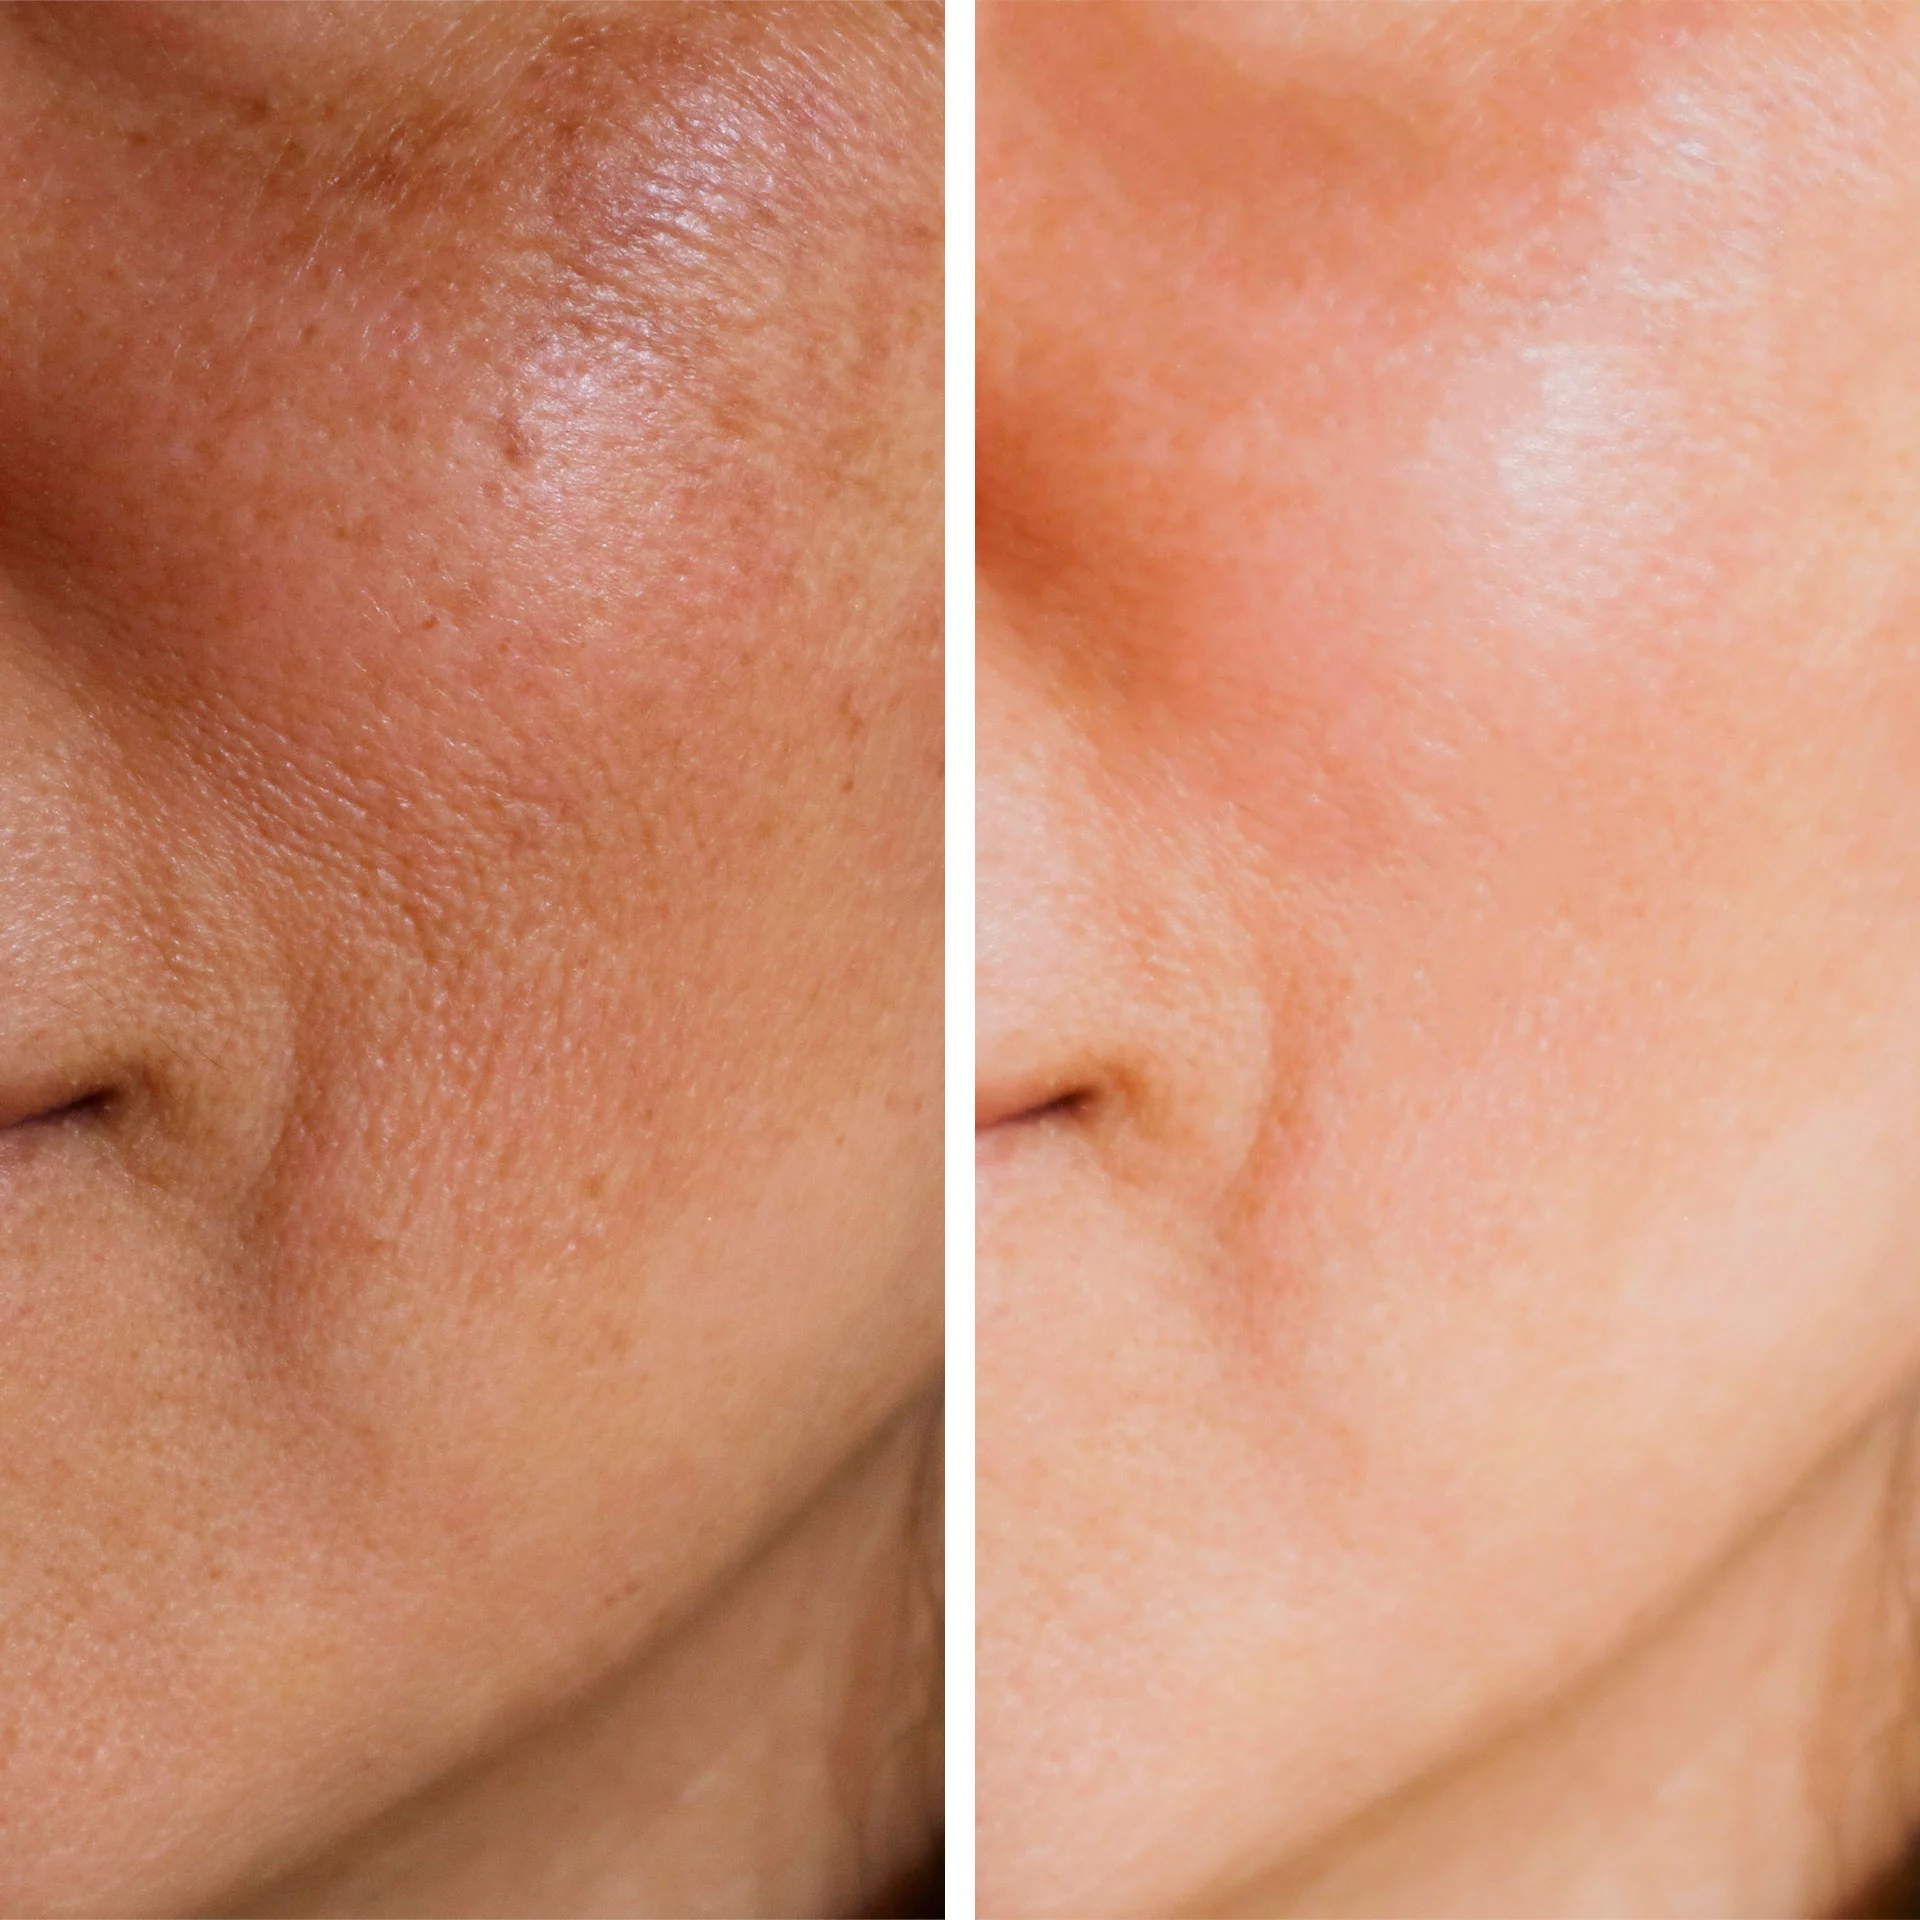 Reveal Radiance: Personalized Laser Resurfacing For You